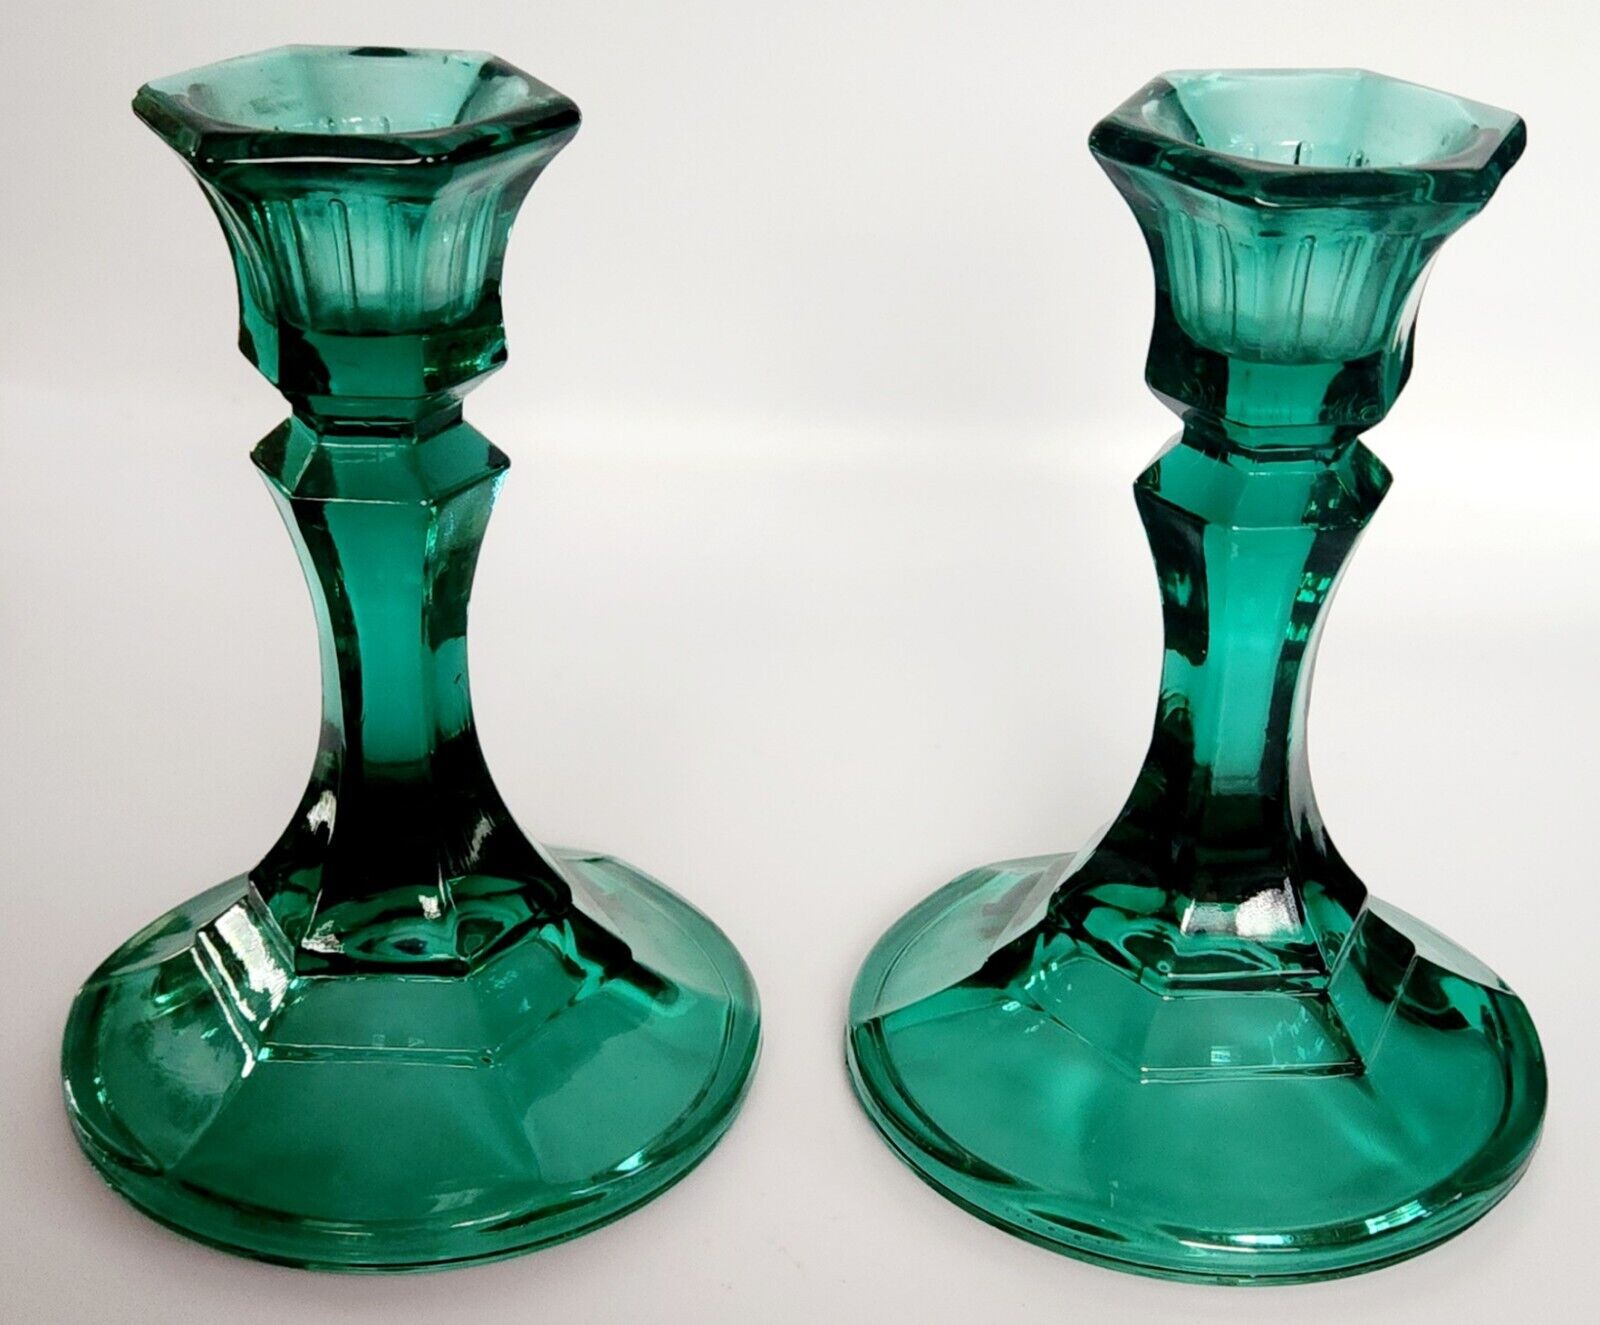 Vintage Pair Of Teal Tierra Indiana Glass Candle Holders